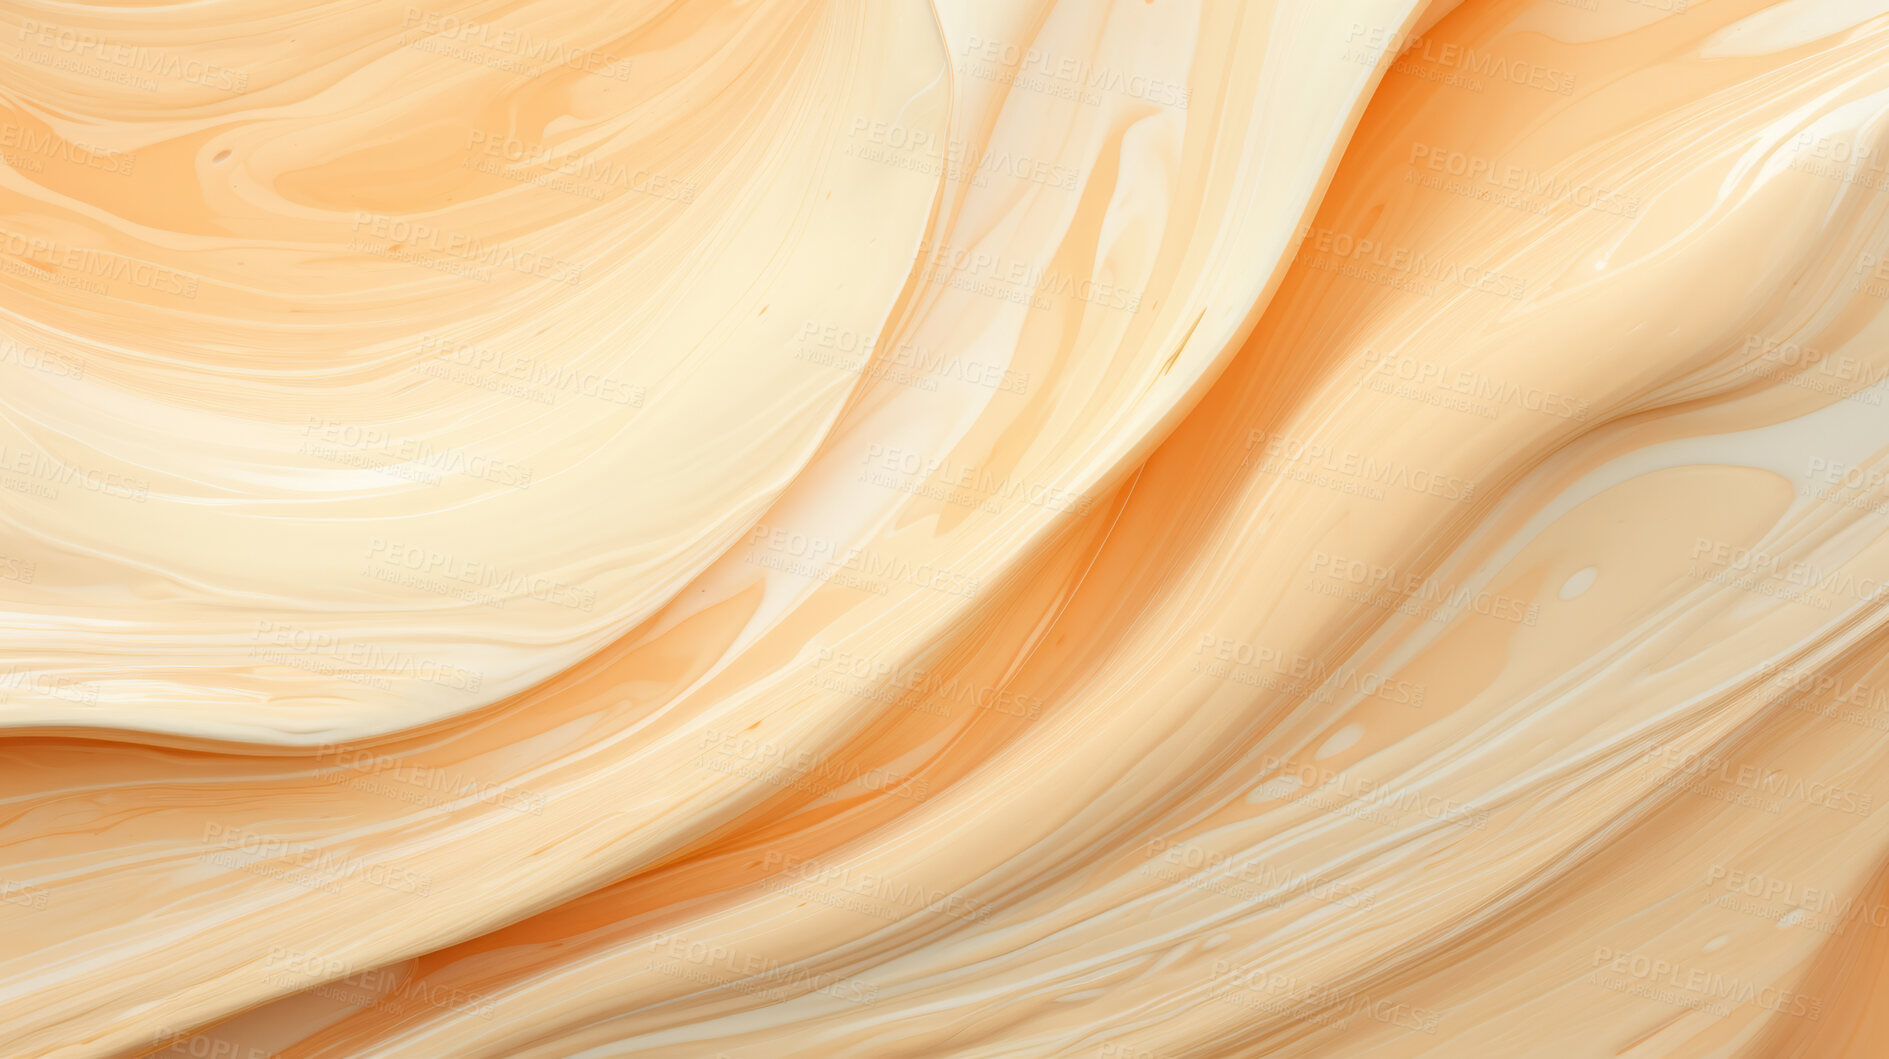 Buy stock photo Beige smooth paint texture close-up. Swirl abstract background.